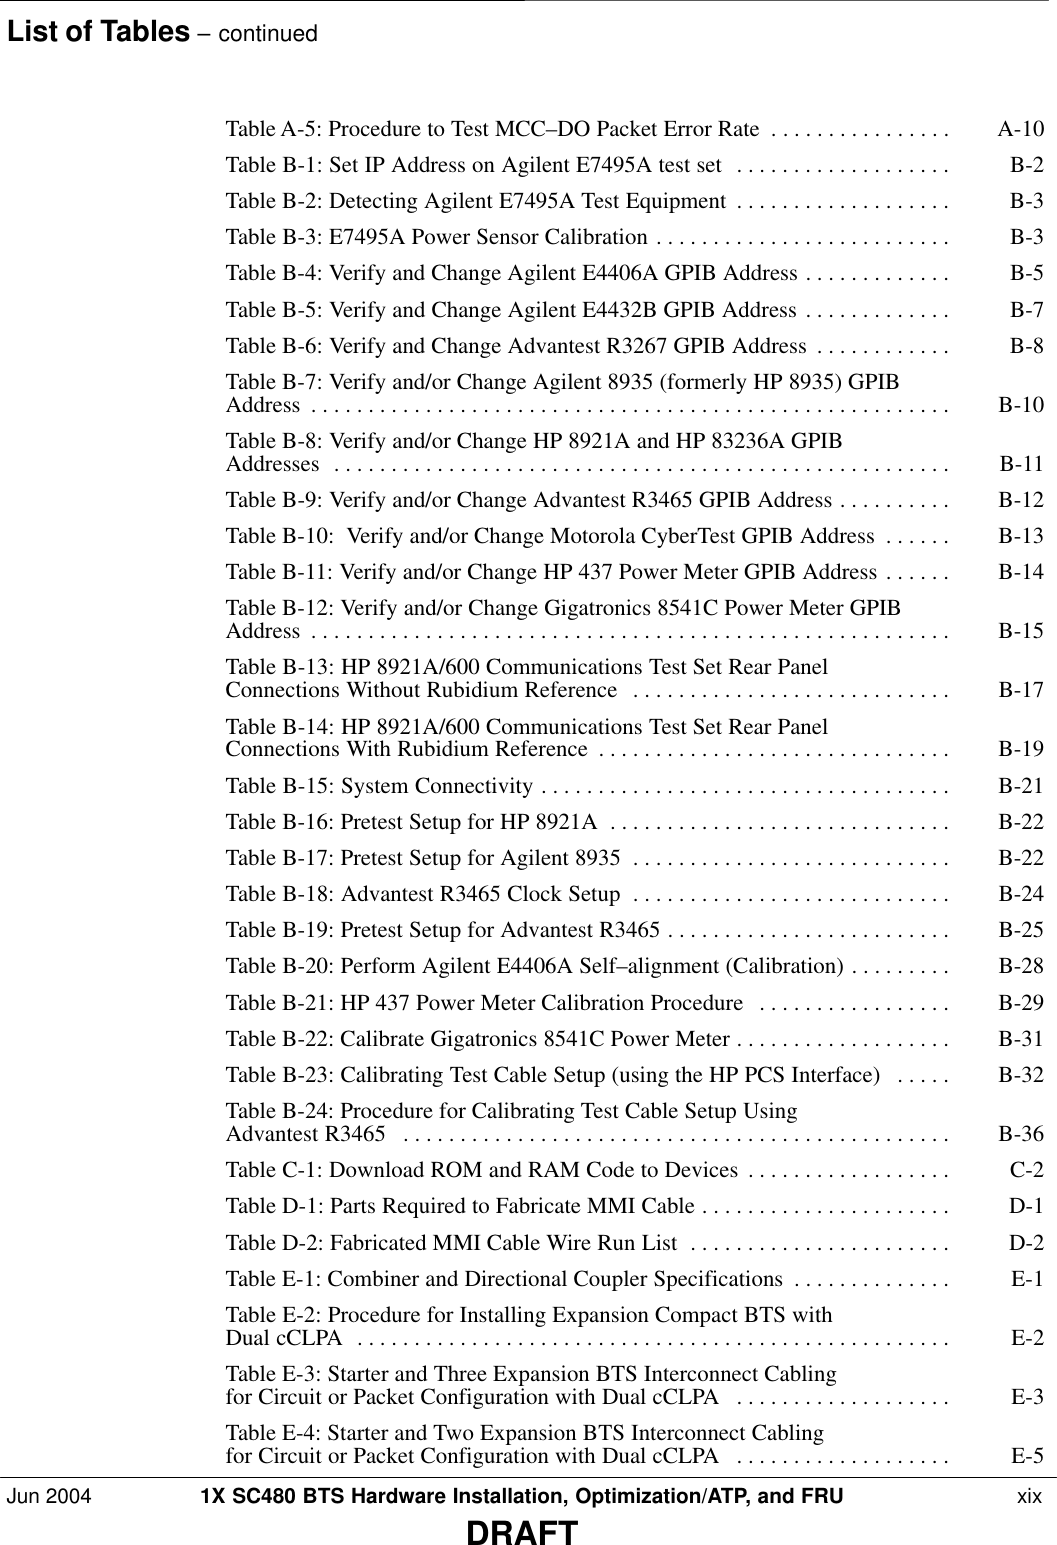 List of Tables – continuedJun 2004 1X SC480 BTS Hardware Installation, Optimization/ATP, and FRU  xixDRAFTTable A-5: Procedure to Test MCC–DO Packet Error Rate A-10 . . . . . . . . . . . . . . . . Table B-1: Set IP Address on Agilent E7495A test set B-2 . . . . . . . . . . . . . . . . . . . Table B-2: Detecting Agilent E7495A Test Equipment B-3 . . . . . . . . . . . . . . . . . . . Table B-3: E7495A Power Sensor Calibration B-3 . . . . . . . . . . . . . . . . . . . . . . . . . . Table B-4: Verify and Change Agilent E4406A GPIB Address B-5 . . . . . . . . . . . . . Table B-5: Verify and Change Agilent E4432B GPIB Address B-7 . . . . . . . . . . . . . Table B-6: Verify and Change Advantest R3267 GPIB Address B-8 . . . . . . . . . . . . Table B-7: Verify and/or Change Agilent 8935 (formerly HP 8935) GPIB Address B-10 . . . . . . . . . . . . . . . . . . . . . . . . . . . . . . . . . . . . . . . . . . . . . . . . . . . . . . . . Table B-8: Verify and/or Change HP 8921A and HP 83236A GPIB Addresses B-11 . . . . . . . . . . . . . . . . . . . . . . . . . . . . . . . . . . . . . . . . . . . . . . . . . . . . . . Table B-9: Verify and/or Change Advantest R3465 GPIB Address B-12 . . . . . . . . . . Table B-10:  Verify and/or Change Motorola CyberTest GPIB Address B-13 . . . . . . Table B-11: Verify and/or Change HP 437 Power Meter GPIB Address B-14 . . . . . . Table B-12: Verify and/or Change Gigatronics 8541C Power Meter GPIB Address B-15 . . . . . . . . . . . . . . . . . . . . . . . . . . . . . . . . . . . . . . . . . . . . . . . . . . . . . . . . Table B-13: HP 8921A/600 Communications Test Set Rear Panel Connections Without Rubidium Reference B-17 . . . . . . . . . . . . . . . . . . . . . . . . . . . . Table B-14: HP 8921A/600 Communications Test Set Rear Panel Connections With Rubidium Reference B-19 . . . . . . . . . . . . . . . . . . . . . . . . . . . . . . . Table B-15: System Connectivity B-21 . . . . . . . . . . . . . . . . . . . . . . . . . . . . . . . . . . . . Table B-16: Pretest Setup for HP 8921A B-22 . . . . . . . . . . . . . . . . . . . . . . . . . . . . . . Table B-17: Pretest Setup for Agilent 8935 B-22 . . . . . . . . . . . . . . . . . . . . . . . . . . . . Table B-18: Advantest R3465 Clock Setup B-24 . . . . . . . . . . . . . . . . . . . . . . . . . . . . Table B-19: Pretest Setup for Advantest R3465 B-25 . . . . . . . . . . . . . . . . . . . . . . . . . Table B-20: Perform Agilent E4406A Self–alignment (Calibration) B-28 . . . . . . . . . Table B-21: HP 437 Power Meter Calibration Procedure B-29 . . . . . . . . . . . . . . . . . Table B-22: Calibrate Gigatronics 8541C Power Meter B-31 . . . . . . . . . . . . . . . . . . . Table B-23: Calibrating Test Cable Setup (using the HP PCS Interface) B-32 . . . . . Table B-24: Procedure for Calibrating Test Cable Setup Using Advantest R3465 B-36 . . . . . . . . . . . . . . . . . . . . . . . . . . . . . . . . . . . . . . . . . . . . . . . . Table C-1: Download ROM and RAM Code to Devices C-2 . . . . . . . . . . . . . . . . . . Table D-1: Parts Required to Fabricate MMI Cable D-1 . . . . . . . . . . . . . . . . . . . . . . Table D-2: Fabricated MMI Cable Wire Run List D-2 . . . . . . . . . . . . . . . . . . . . . . . Table E-1: Combiner and Directional Coupler Specifications E-1 . . . . . . . . . . . . . . Table E-2: Procedure for Installing Expansion Compact BTS with Dual cCLPA E-2 . . . . . . . . . . . . . . . . . . . . . . . . . . . . . . . . . . . . . . . . . . . . . . . . . . . . Table E-3: Starter and Three Expansion BTS Interconnect Cabling for Circuit or Packet Configuration with Dual cCLPA E-3 . . . . . . . . . . . . . . . . . . . Table E-4: Starter and Two Expansion BTS Interconnect Cabling for Circuit or Packet Configuration with Dual cCLPA E-5 . . . . . . . . . . . . . . . . . . . 